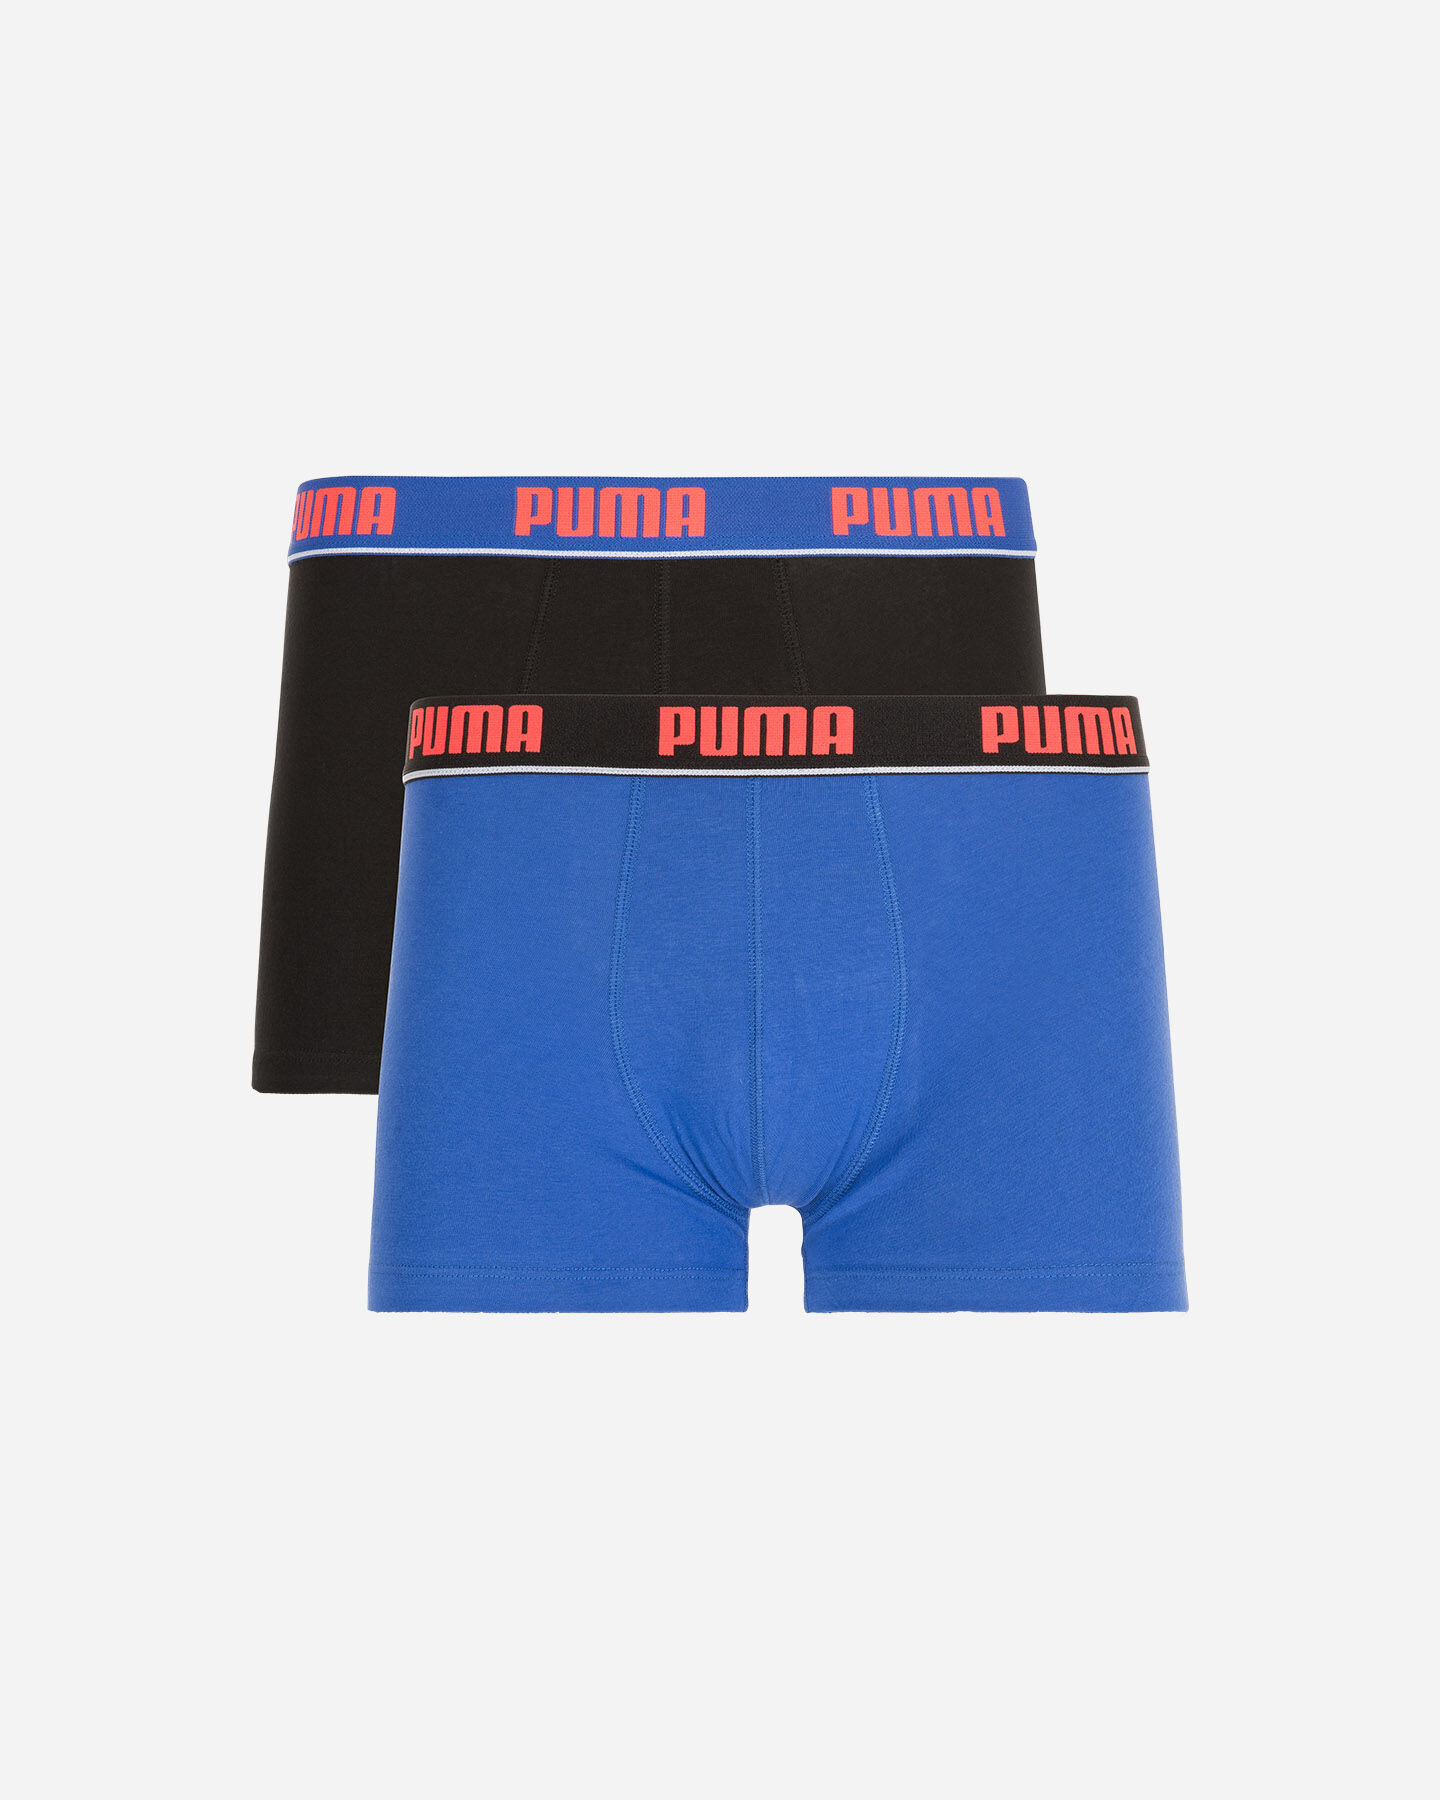  Intimo PUMA 2 PACK BOXER SHORT M S4082607|004|010 scatto 0